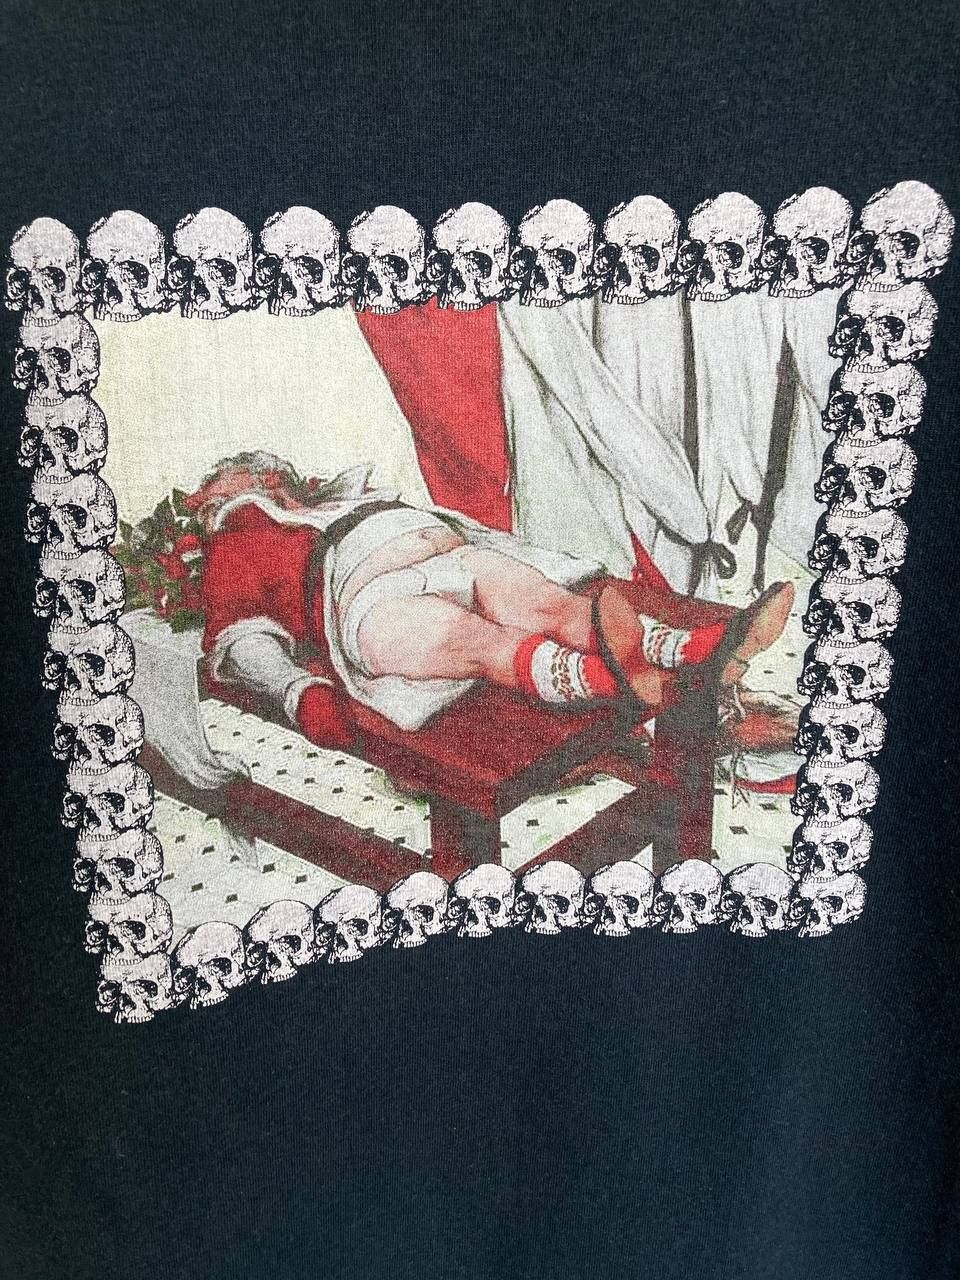 Vintage Undercover “The Last Days of Santa Claus” Tee - 4